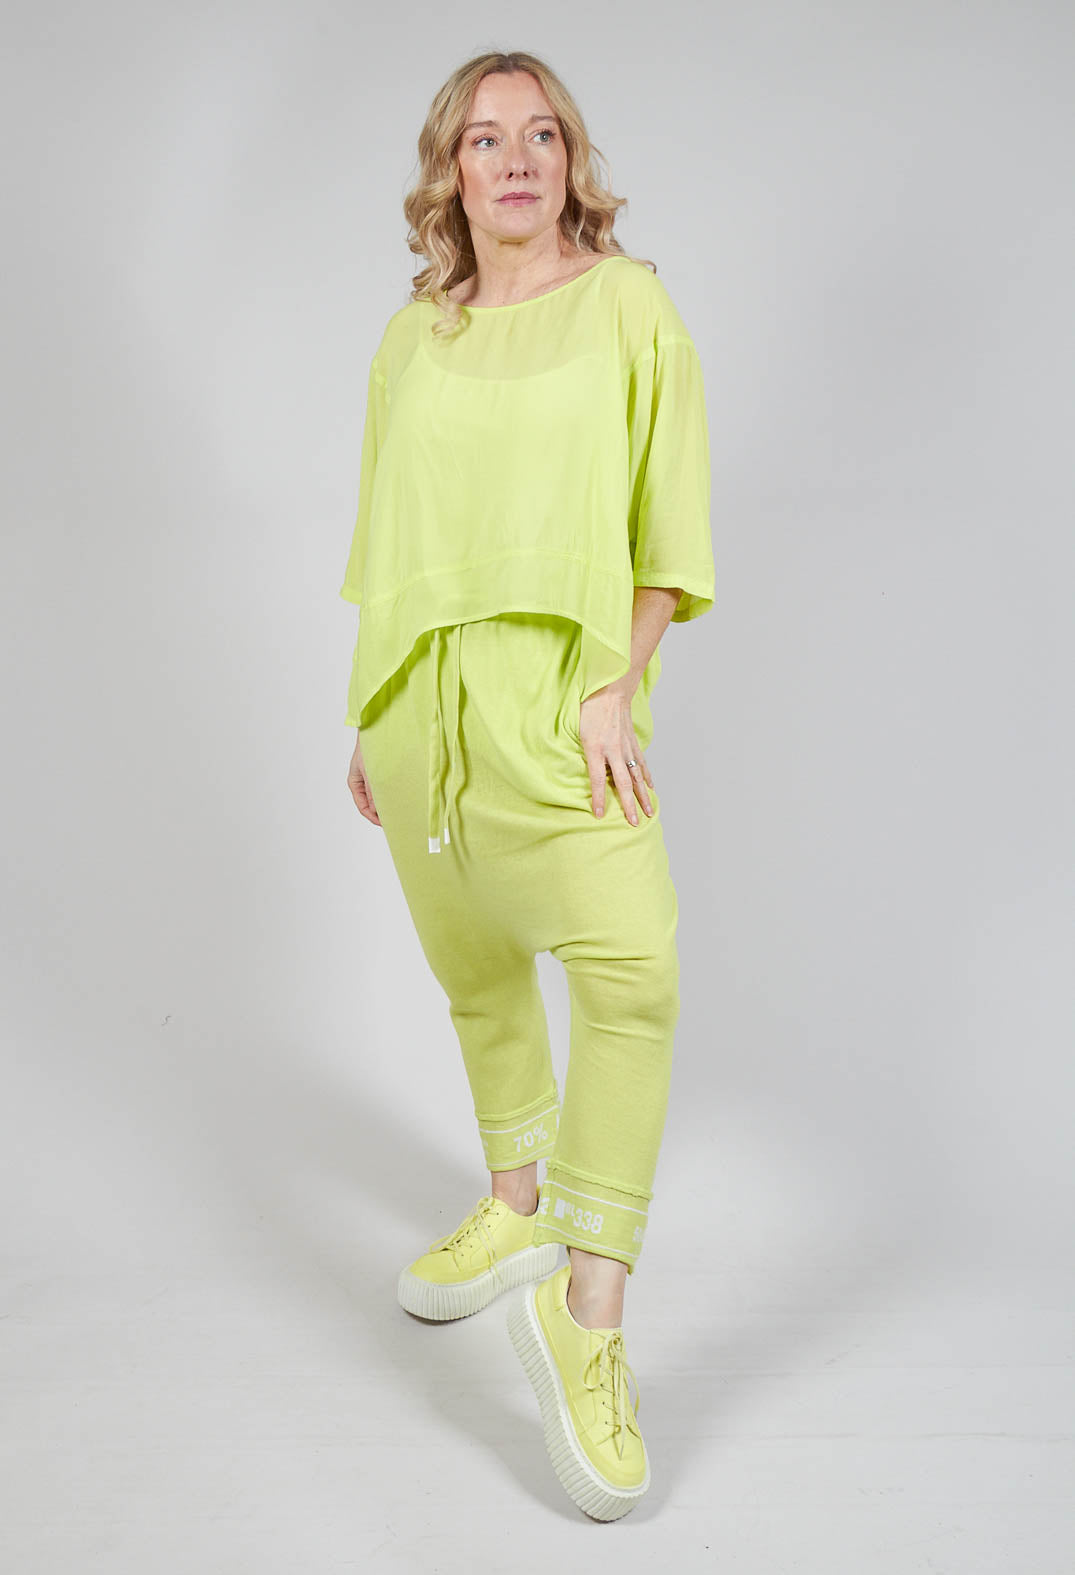 Relaxed Fit Jersey Top in Sun